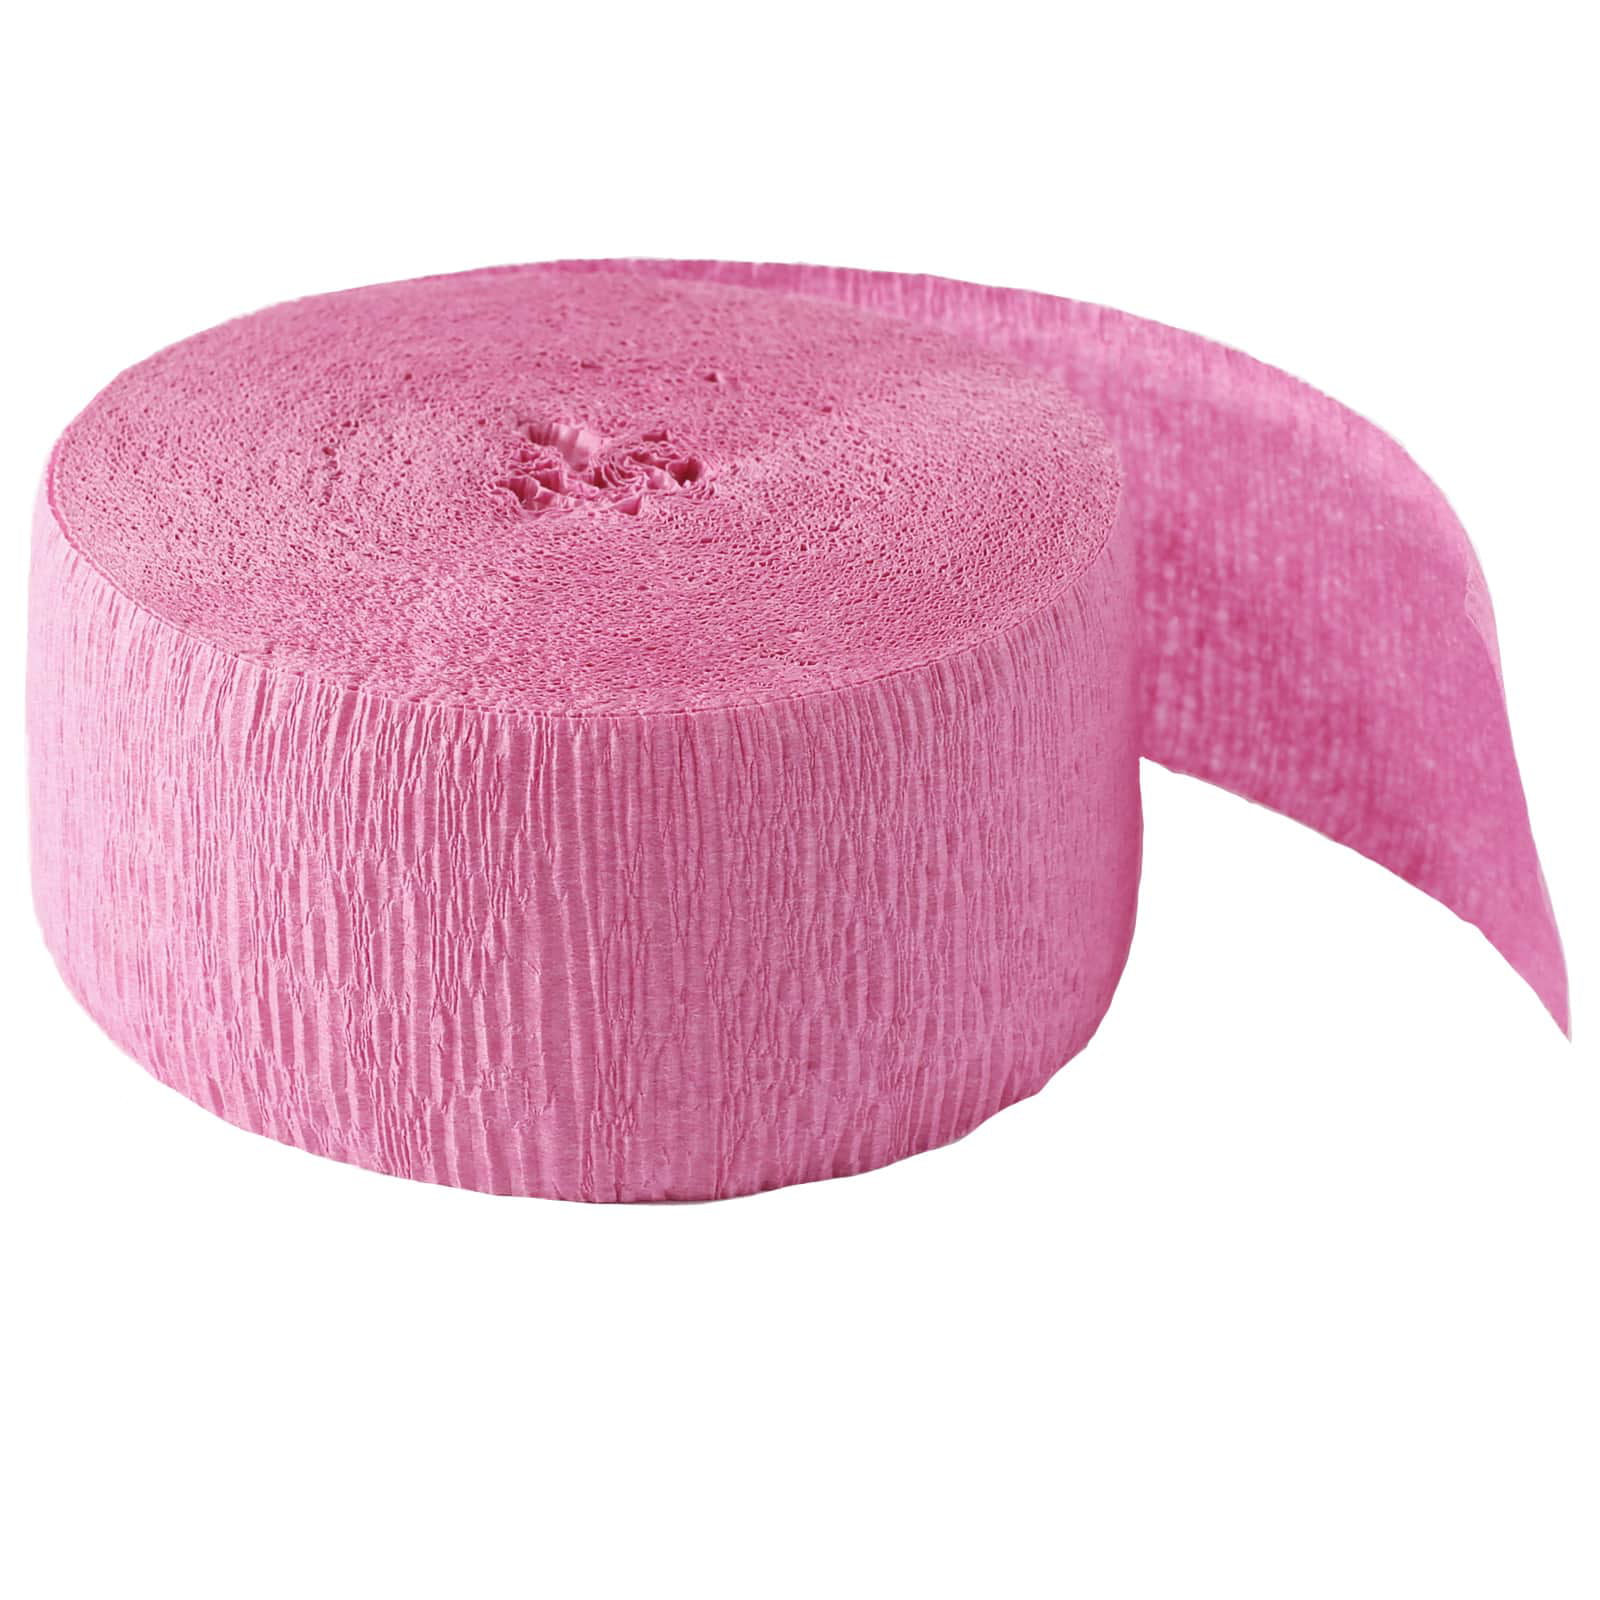 12 Pack: 81ft. Pink Crepe Streamer by Celebrate It™